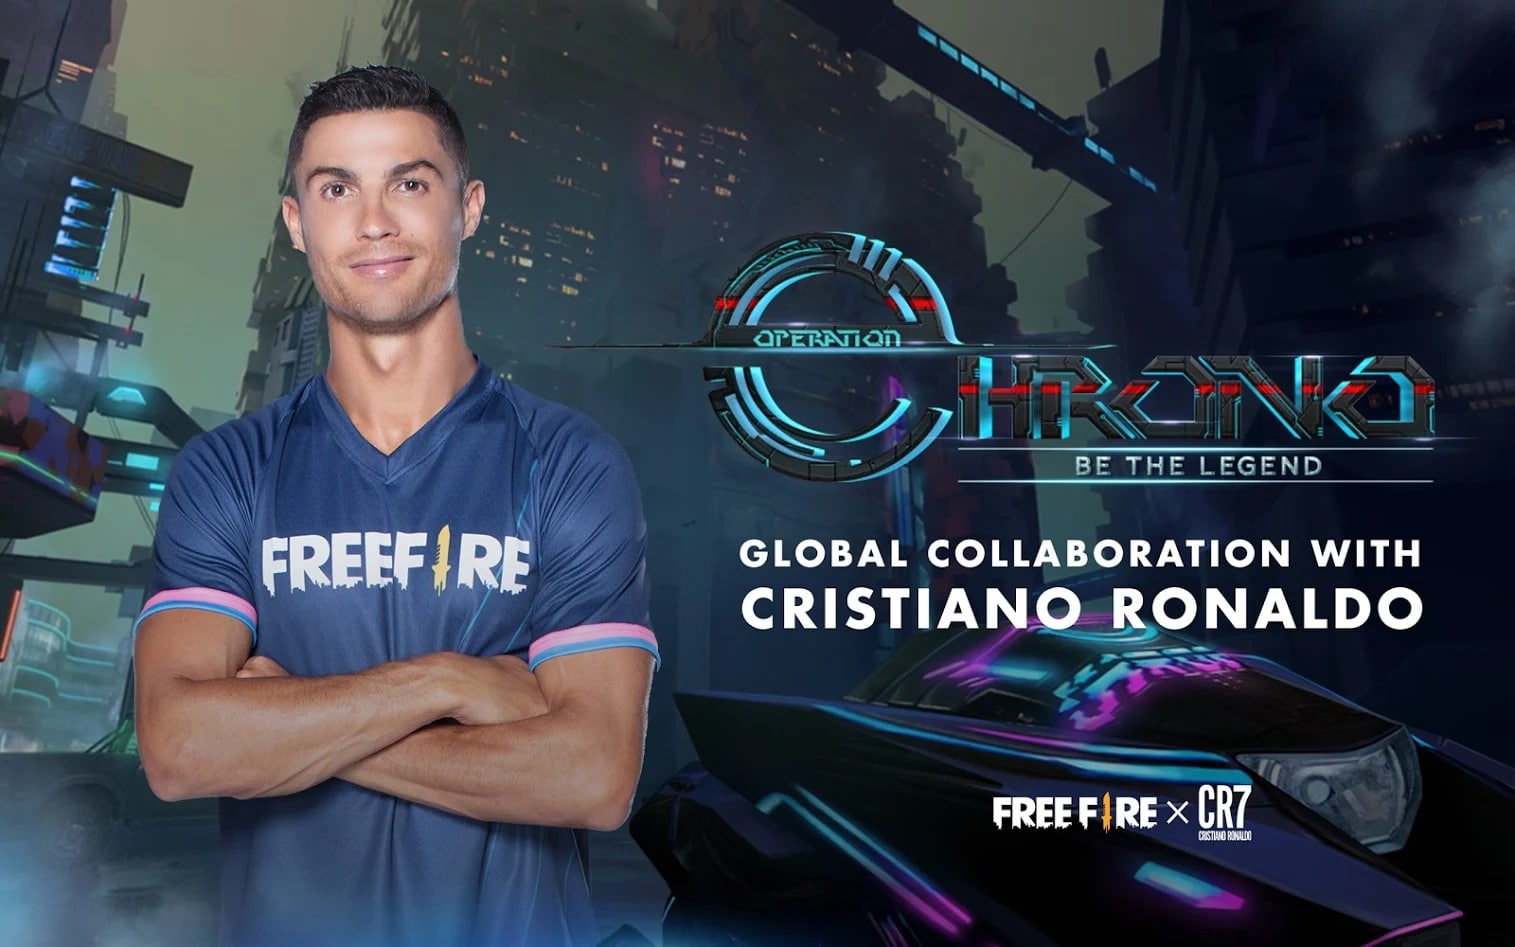 How To Get The New Cr7 Chrono Character In Free Fire